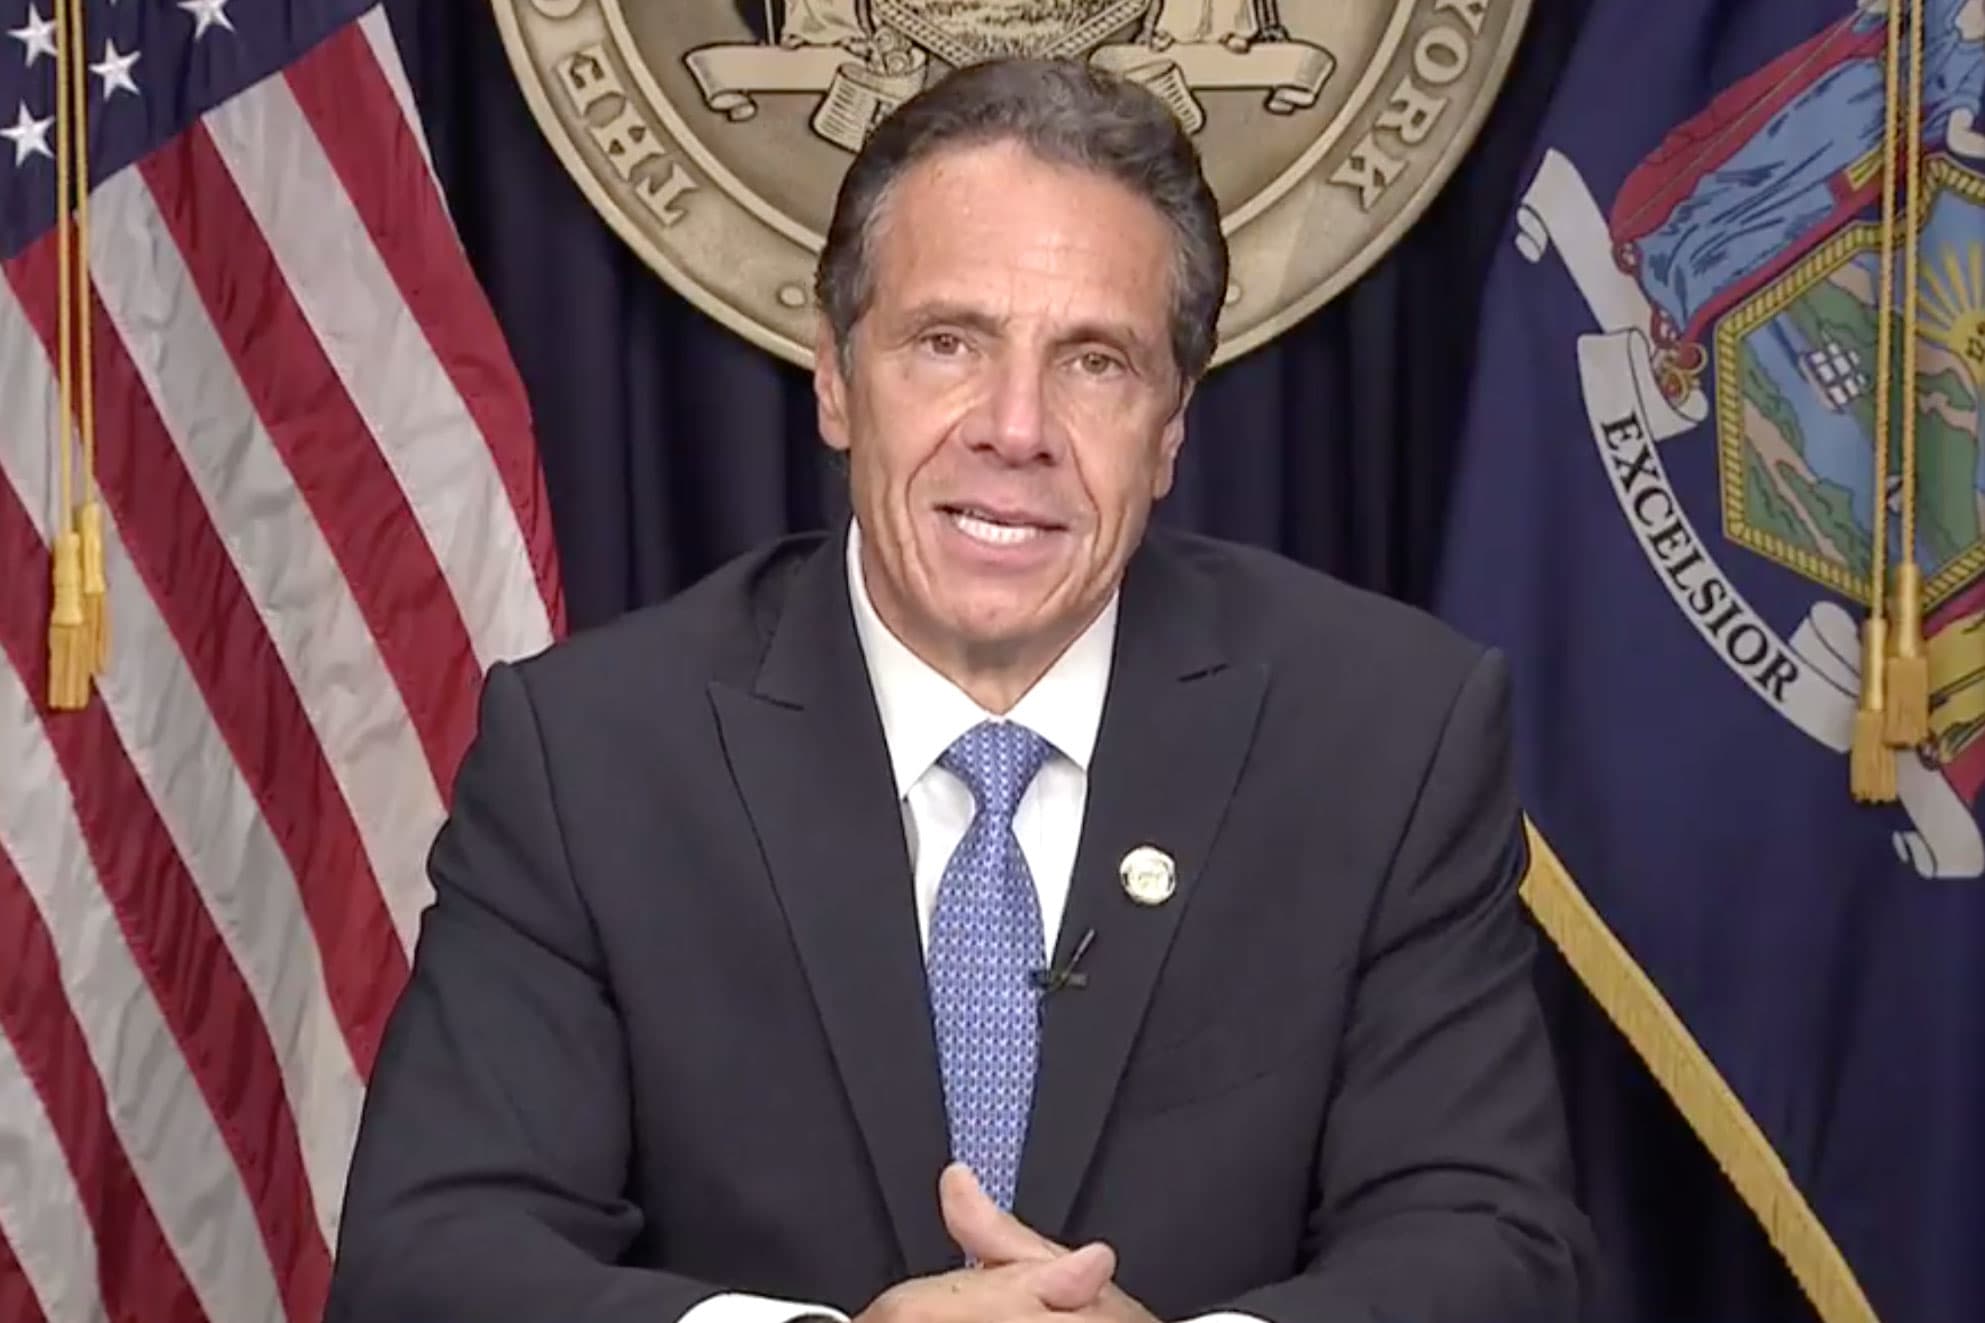 New York Gov. Andrew Cuomo resigns over sexual harassment scandal